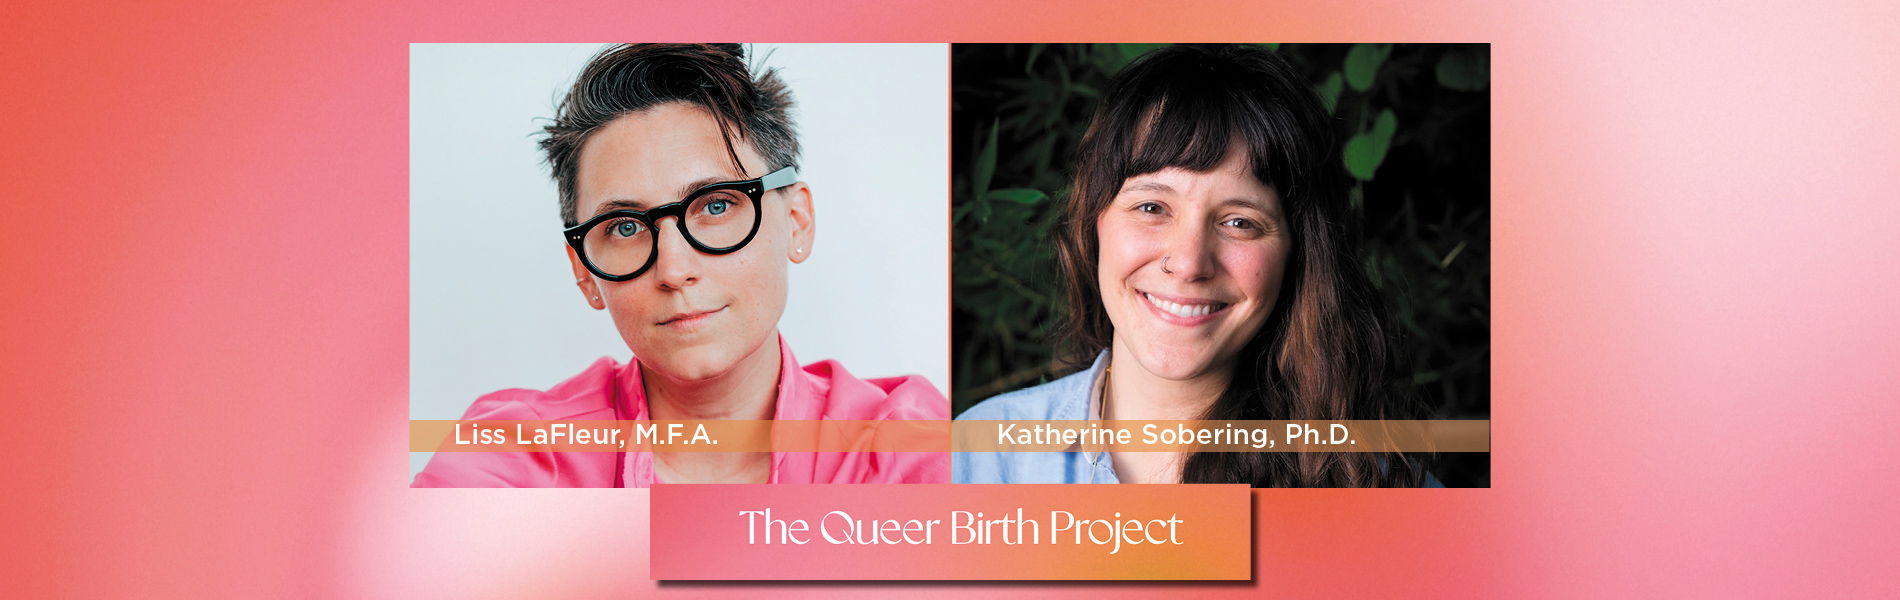 The Queer Birth Project banner with photos of Liss LaFleur and Katherine Sobering, smiling women looking at the camera